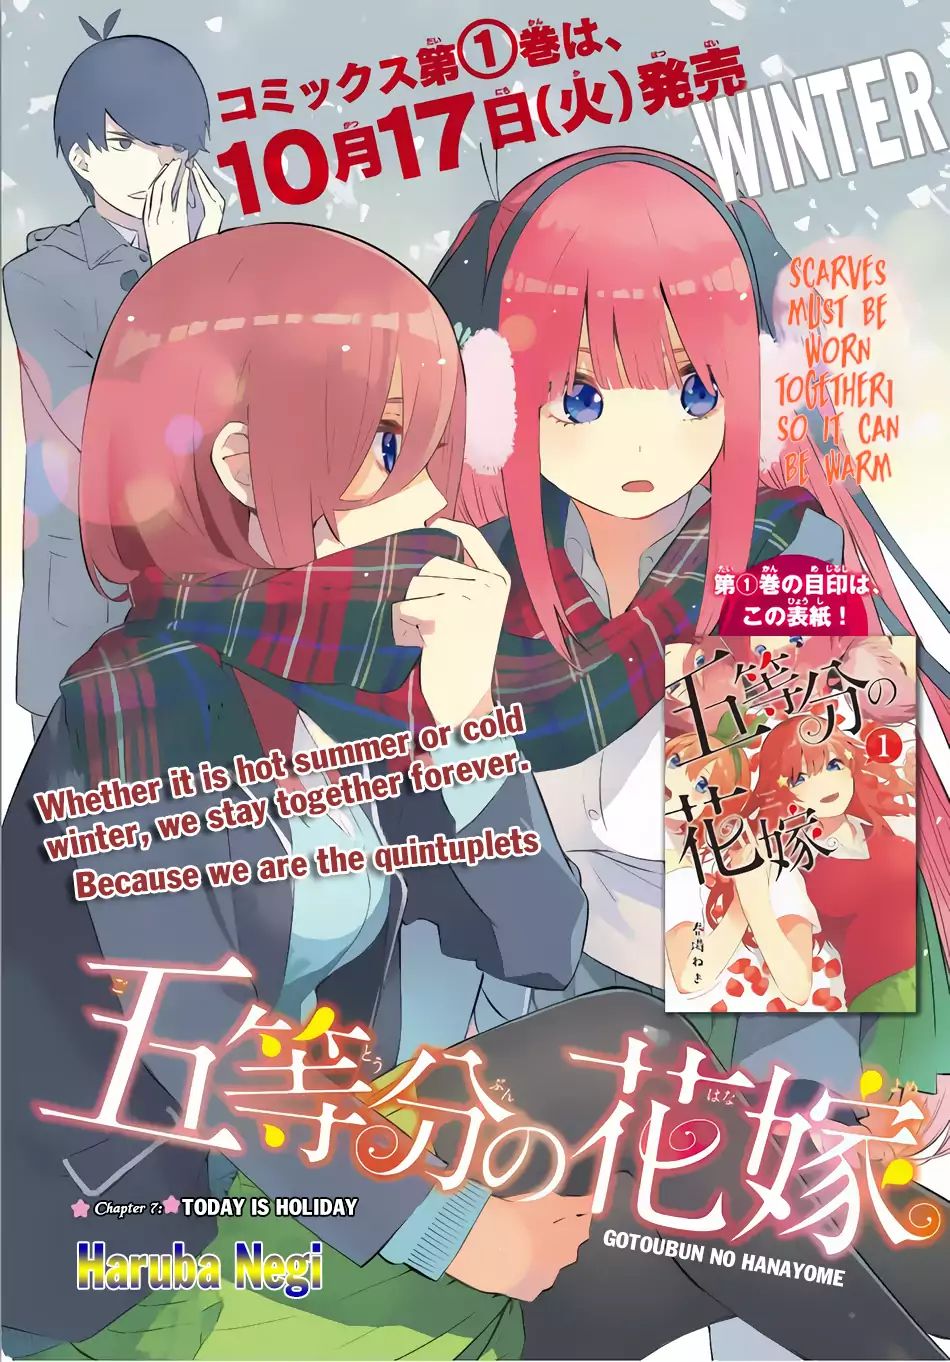 Go-Toubun No Hanayome Vol.2 Chapter 7: Today Is Holiday - Picture 3